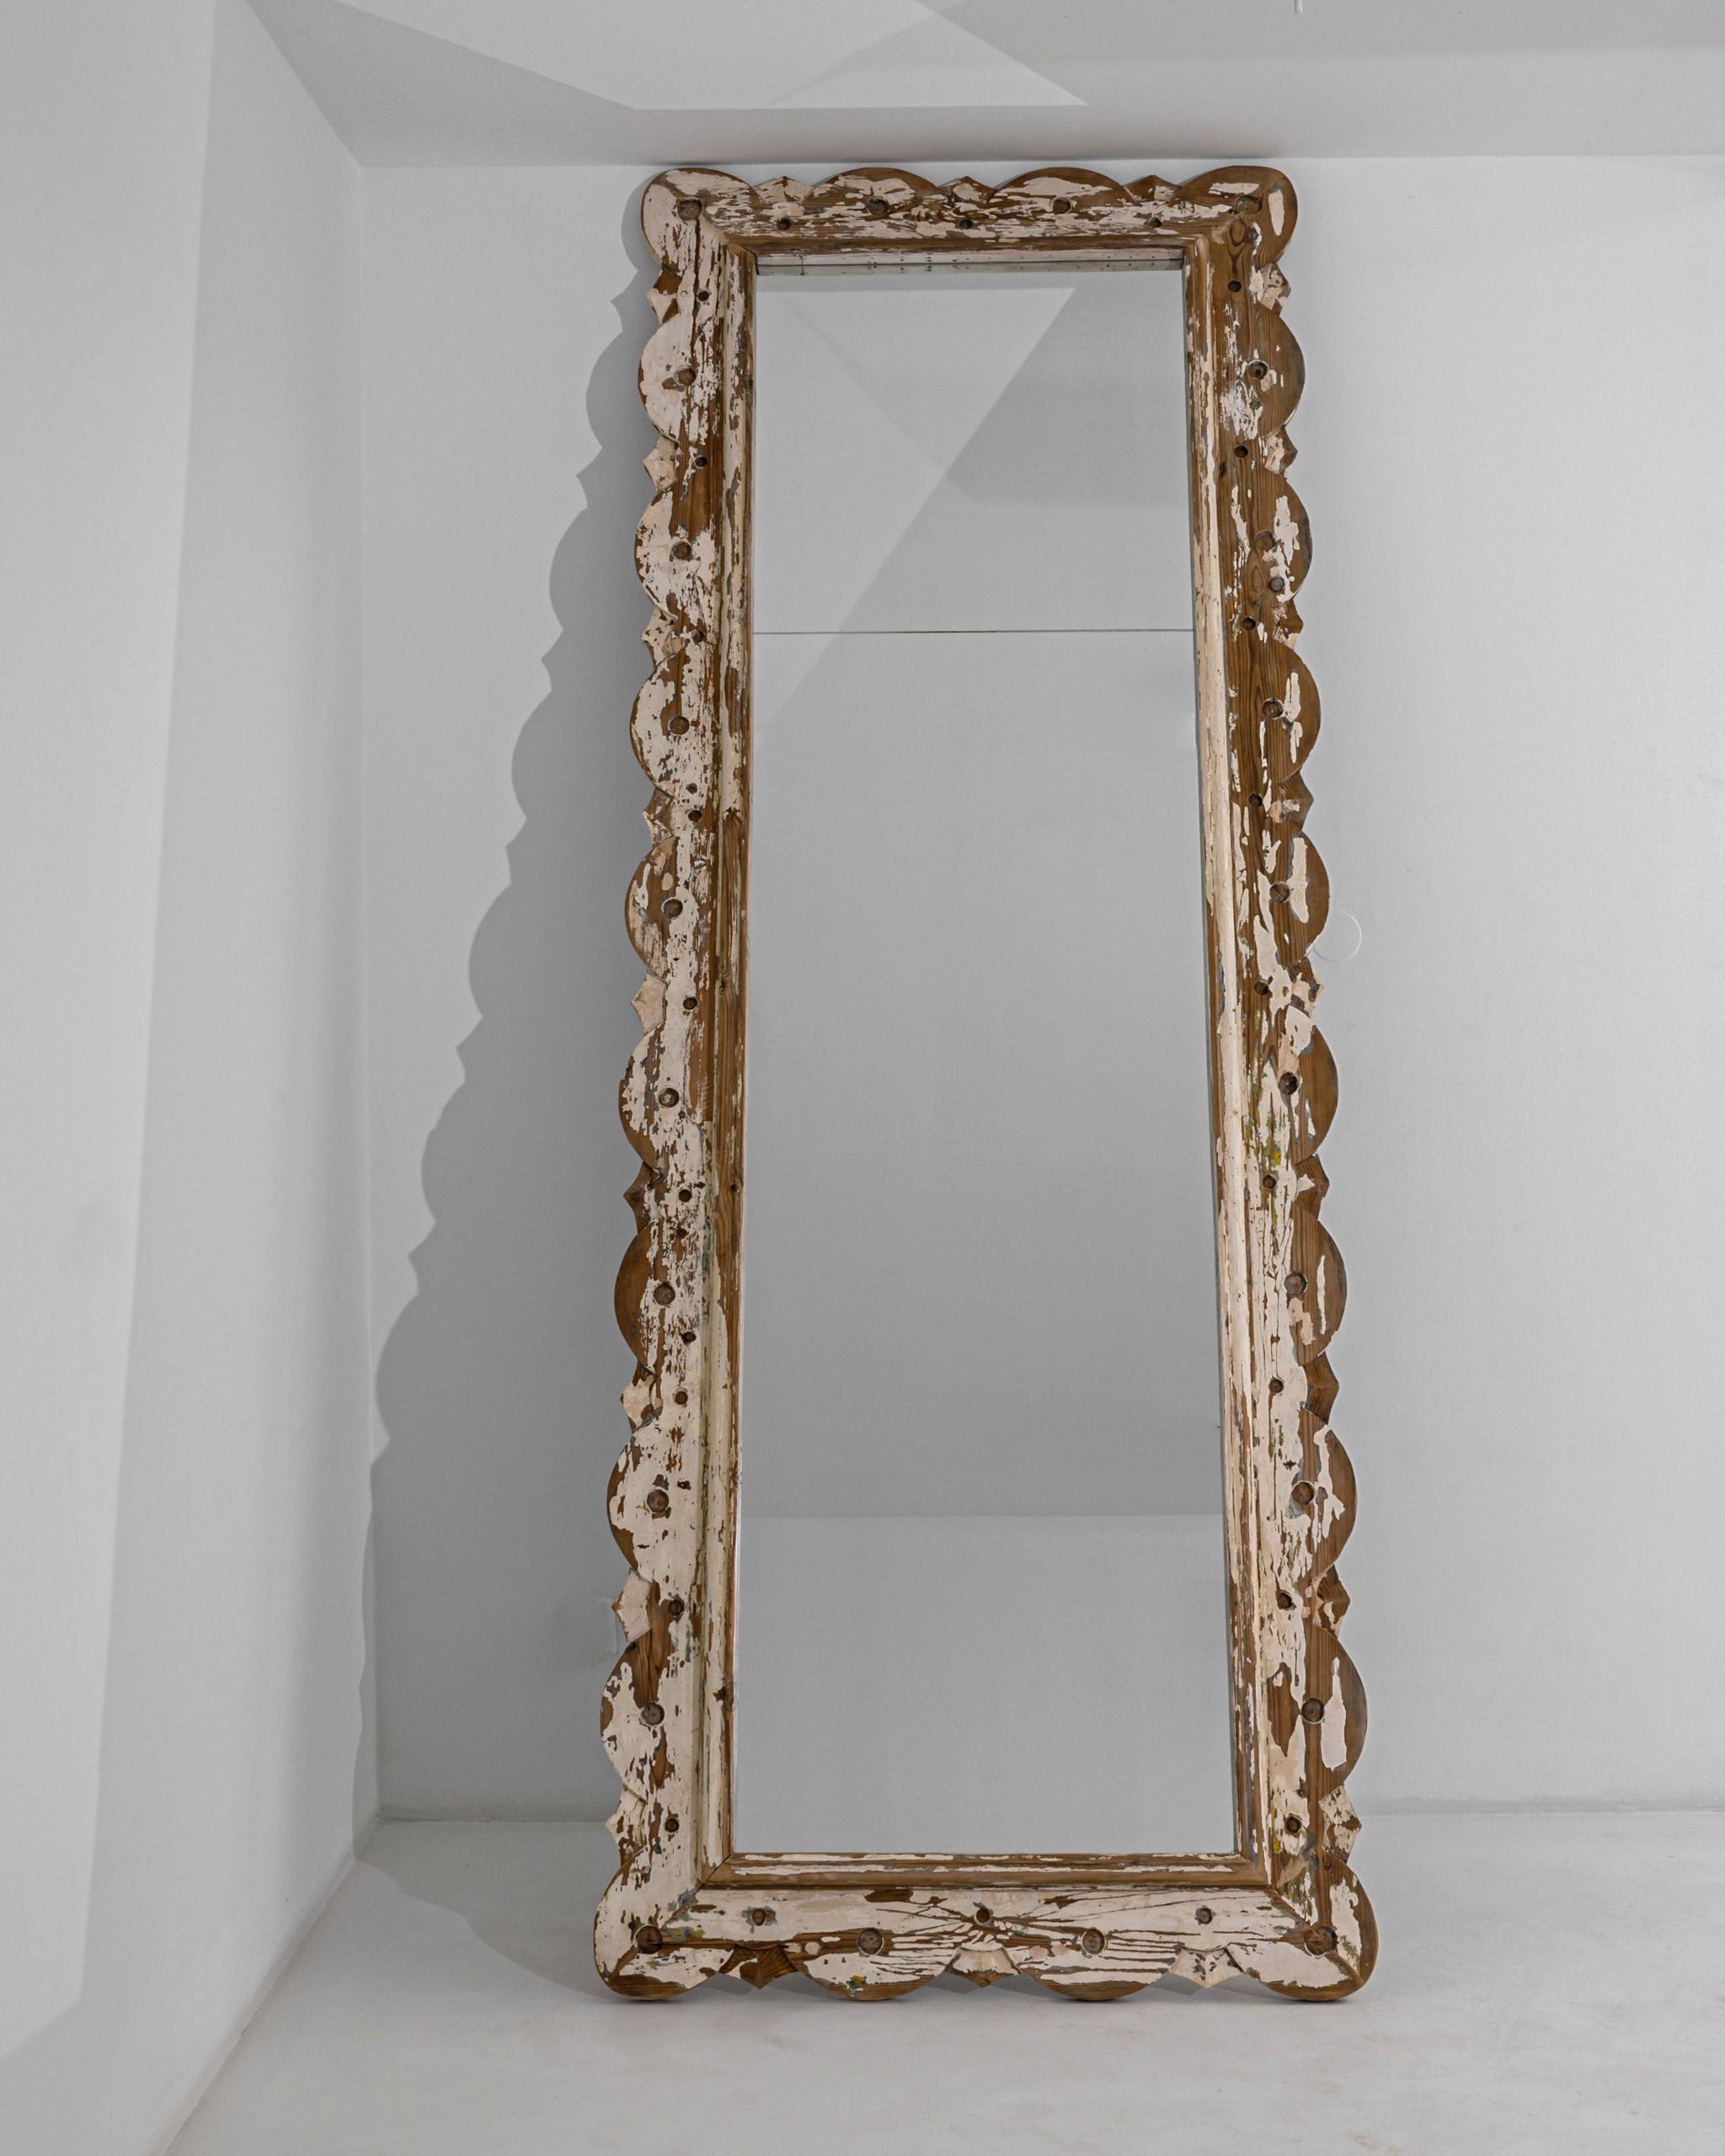 This antique wooden mirror was produced in France, circa 1900. A tall piece with a striking patina elevating over three meters, and flaunting a seasoned russet wood under a cream white paint. The frame is layered with acute and rounded shapes,